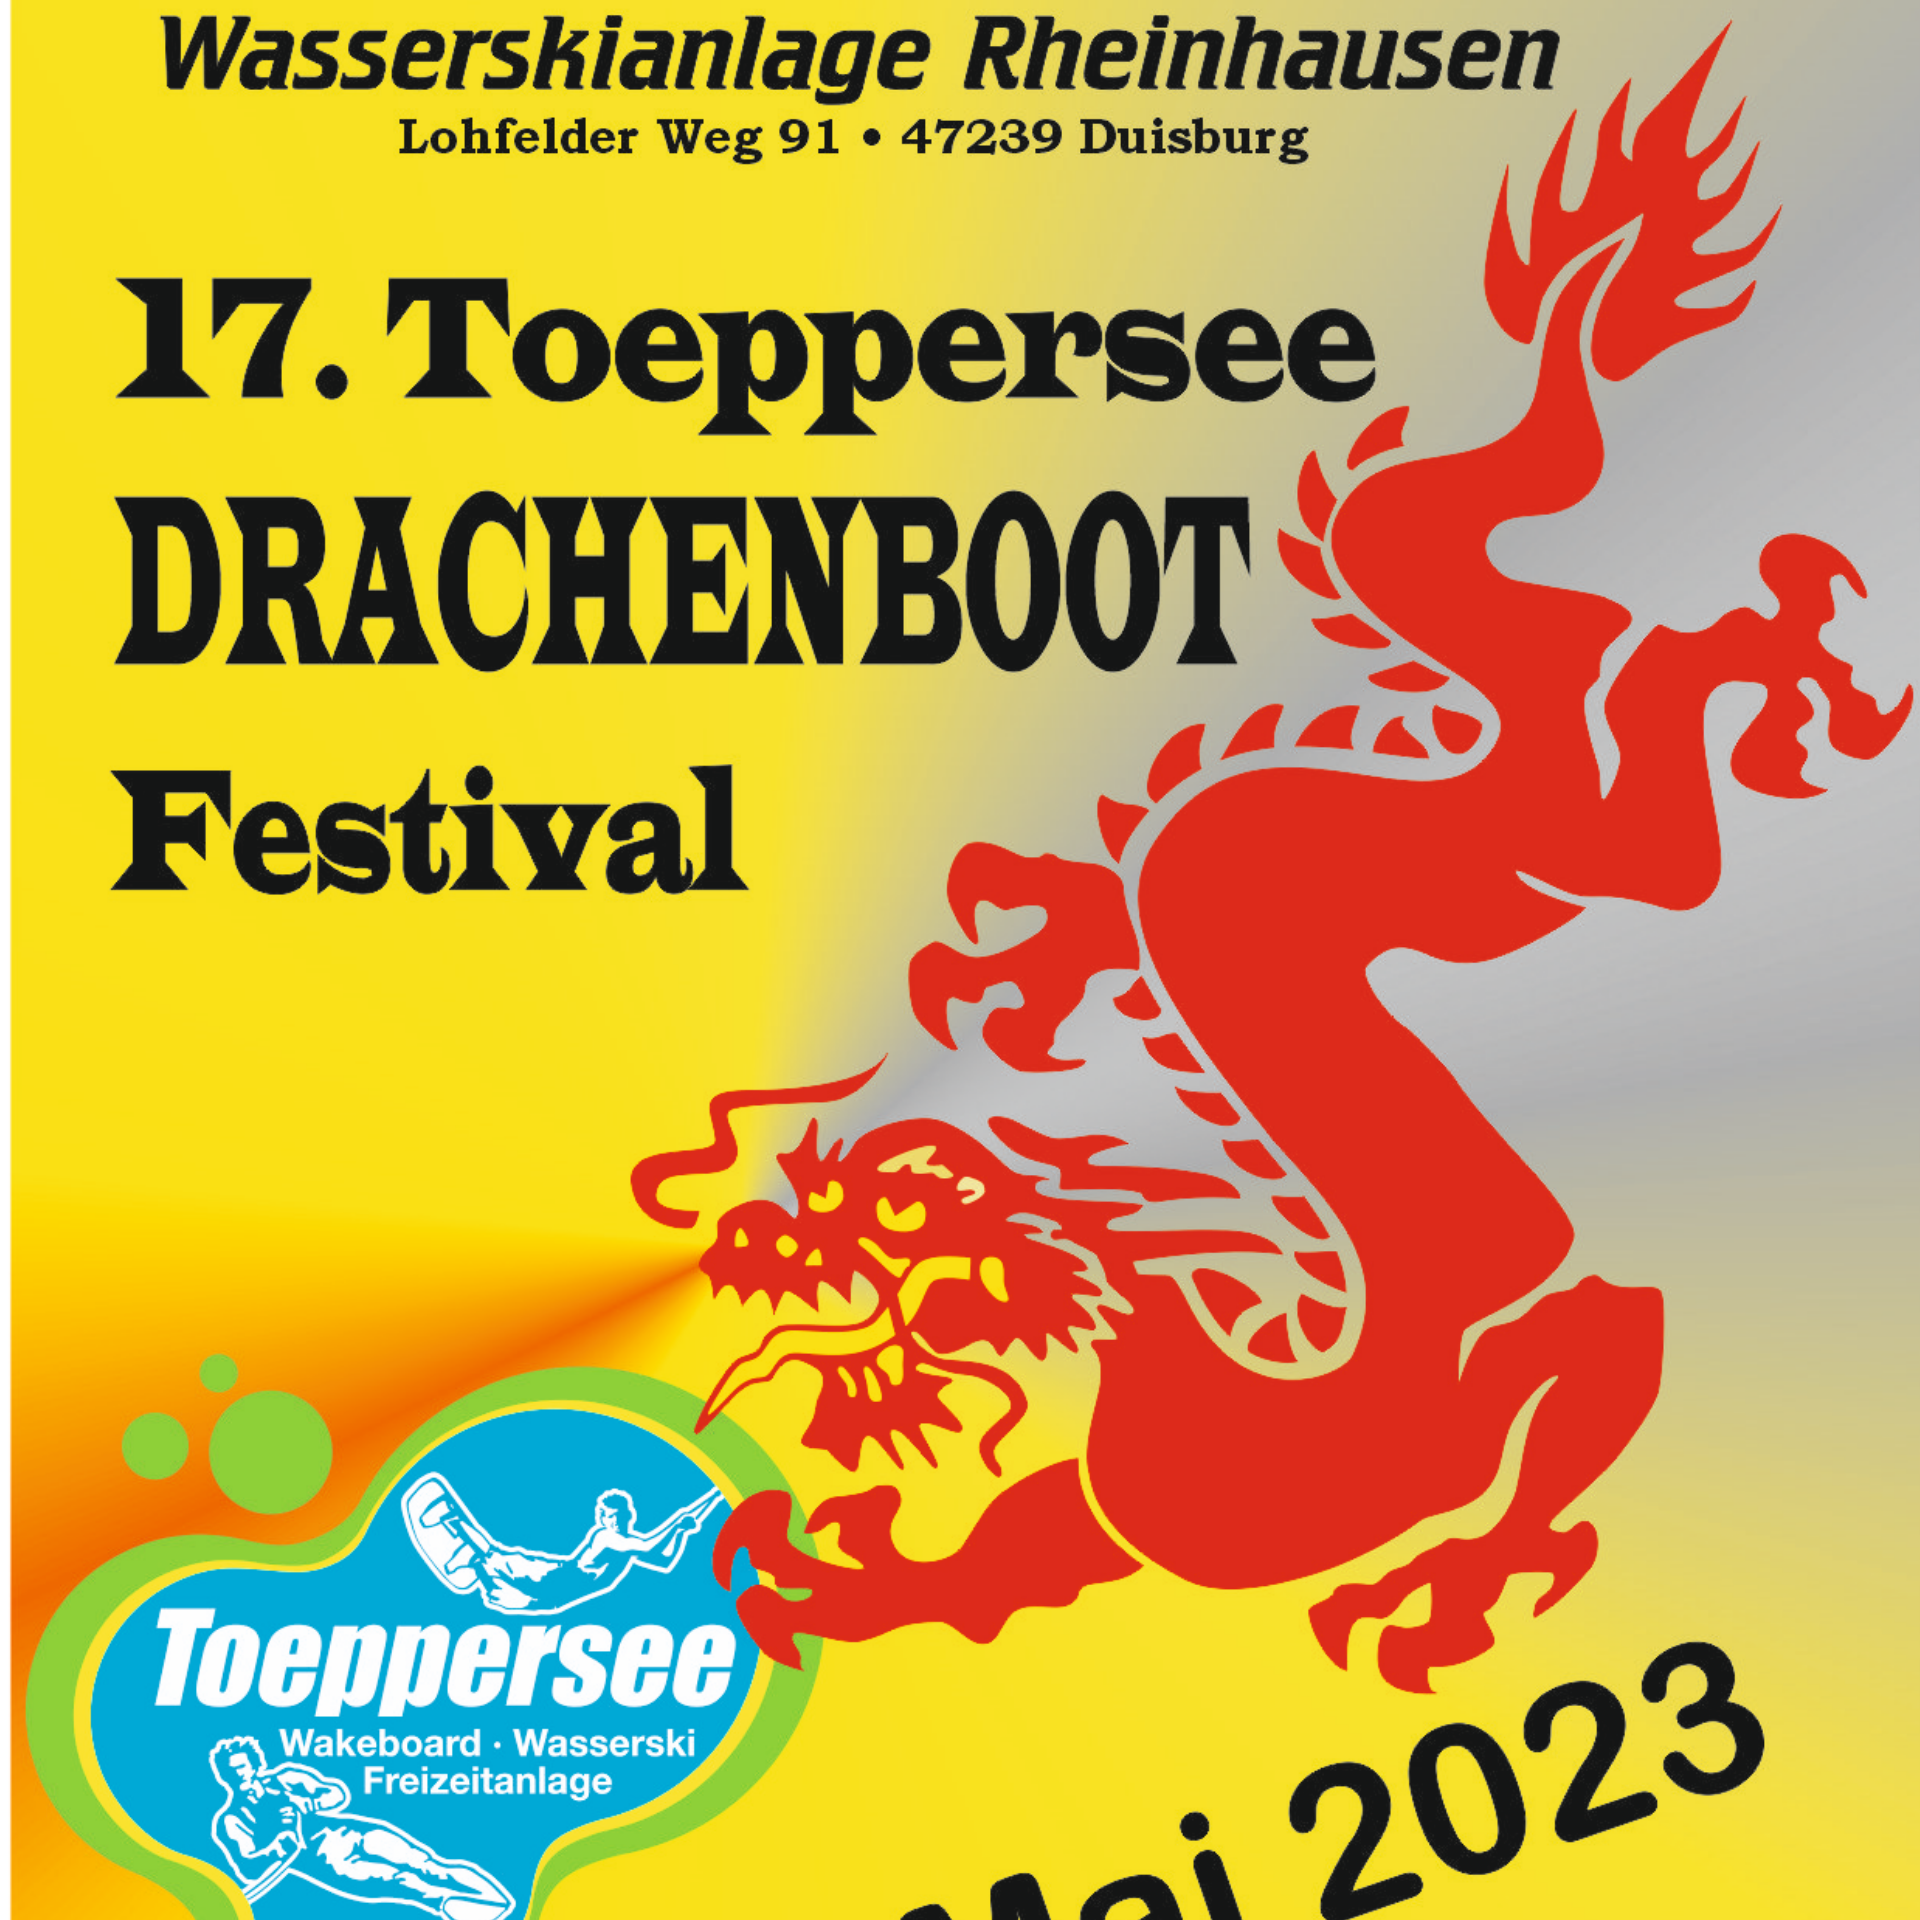 17. Toeppersee Drachenboot Festival